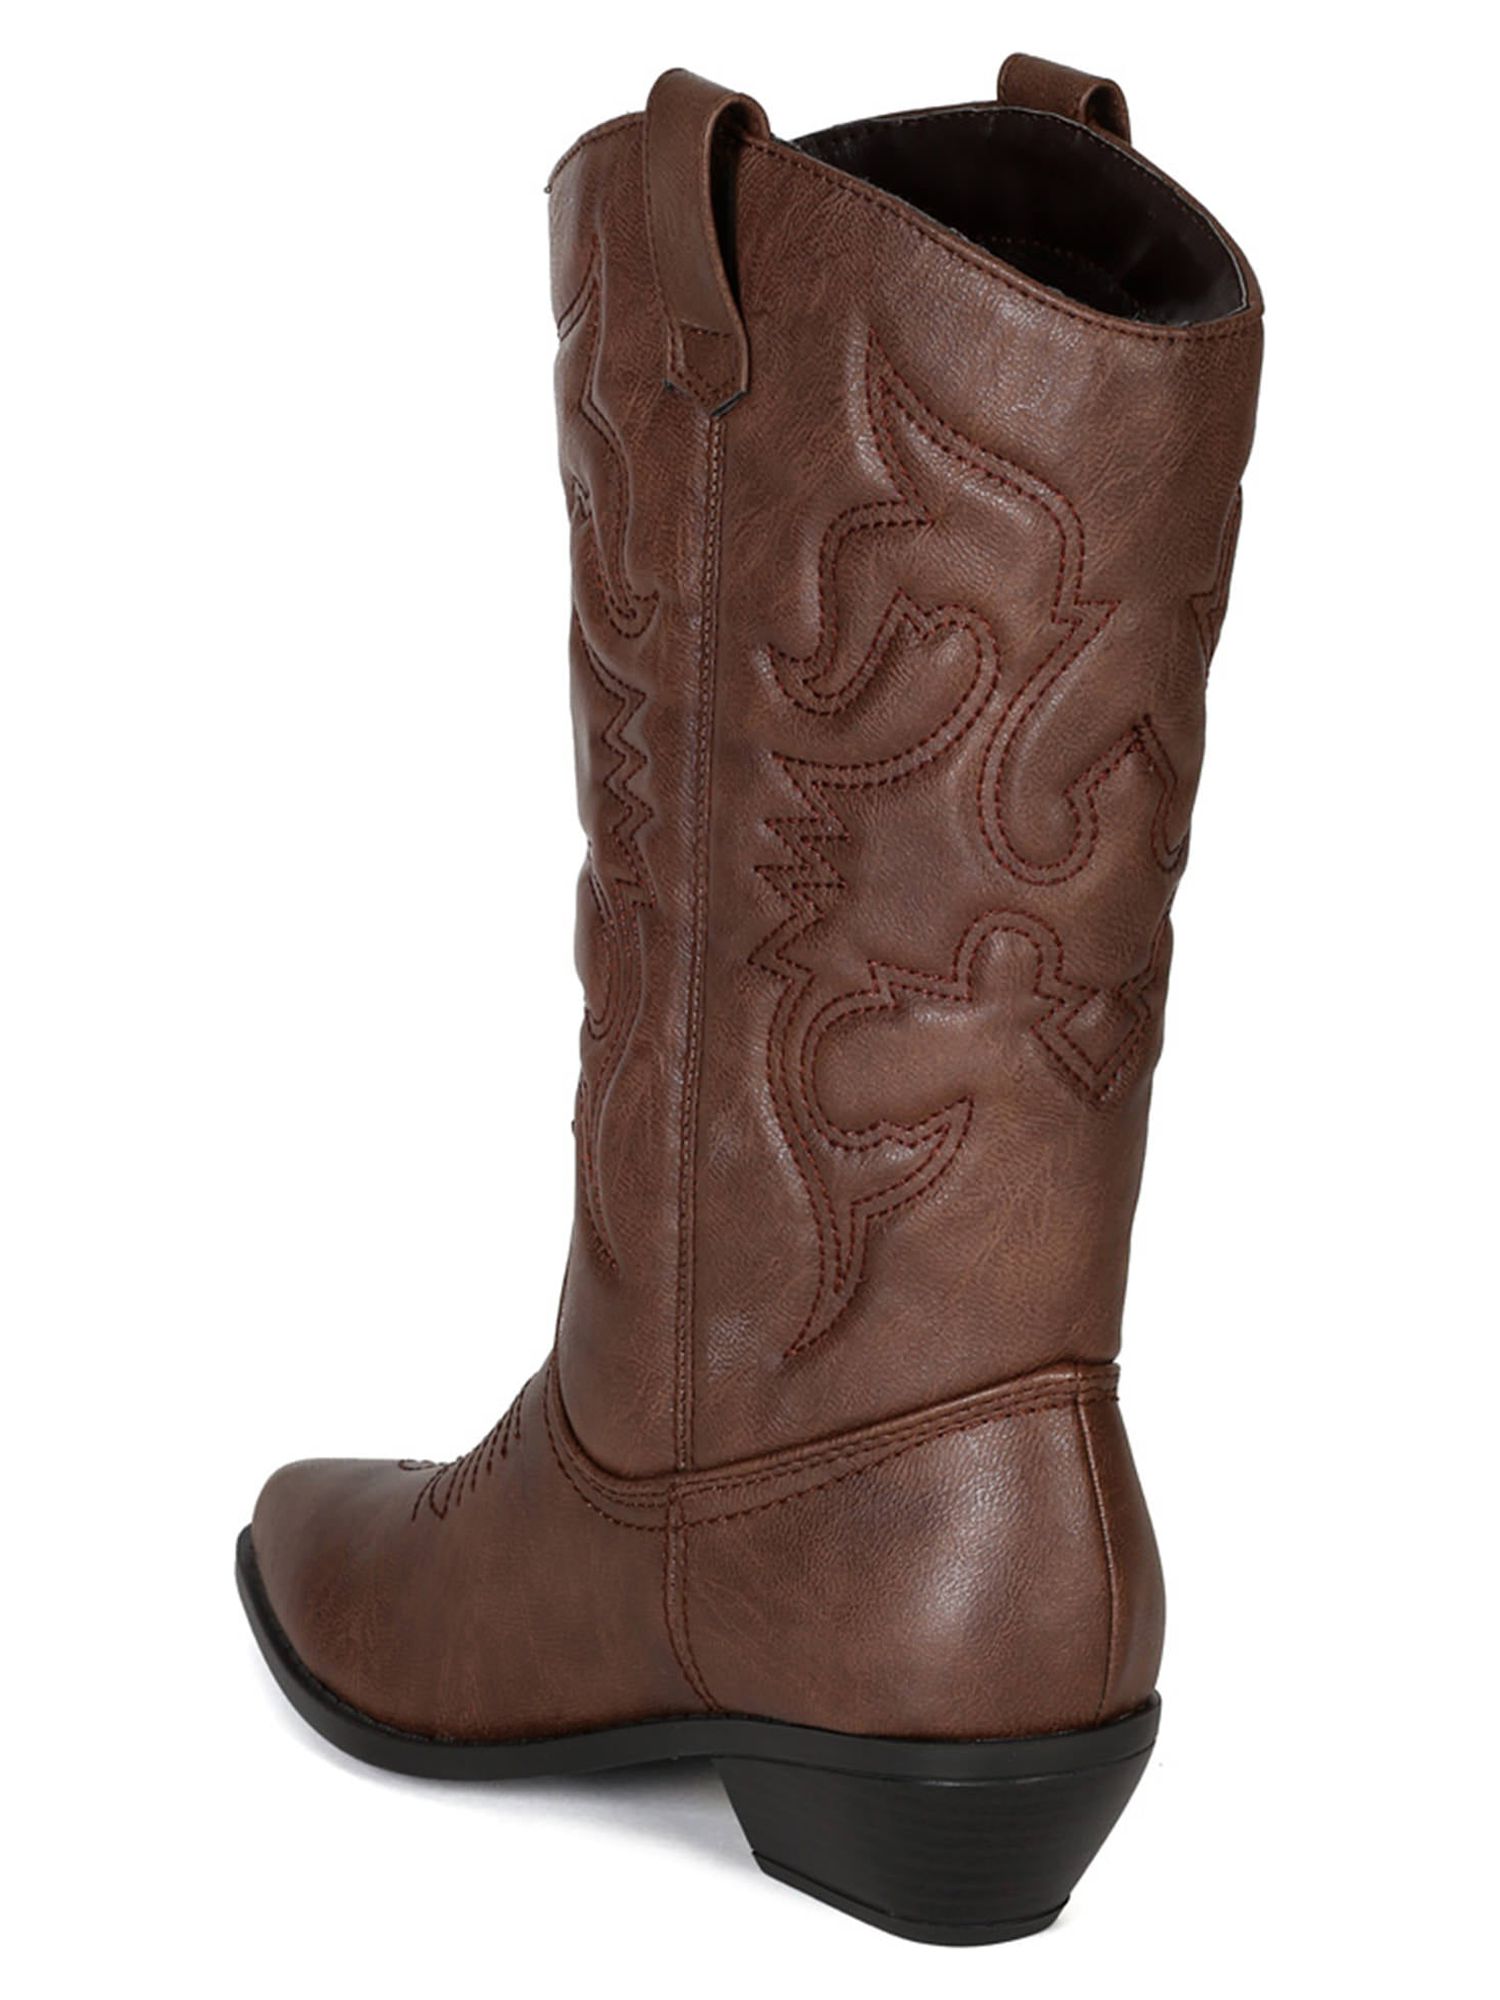 Reno Tan Brwon Soda Cowboy Western Stitched Boots Women Cowgirl Boots Pointy Toe Knee High - image 3 of 3